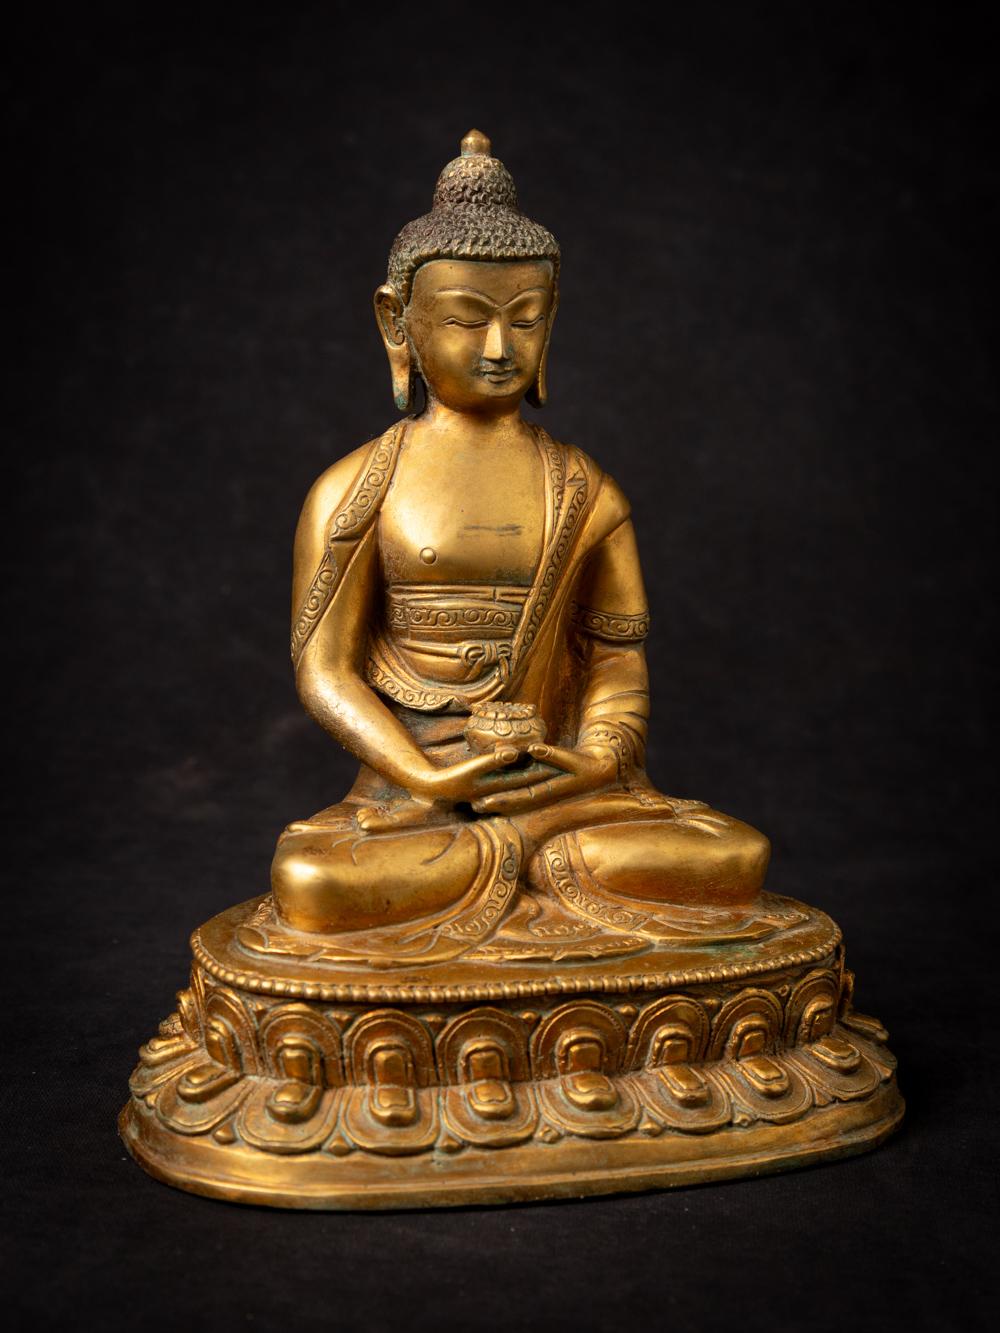 This Old bronze Nepali Buddha statue is a true masterpiece of craftsmanship and spirituality. Standing at a majestic 21.5 cm in height, with dimensions of 17.5 cm in width and 12.9 cm in depth, it is a substantial representation of the Buddha.

The